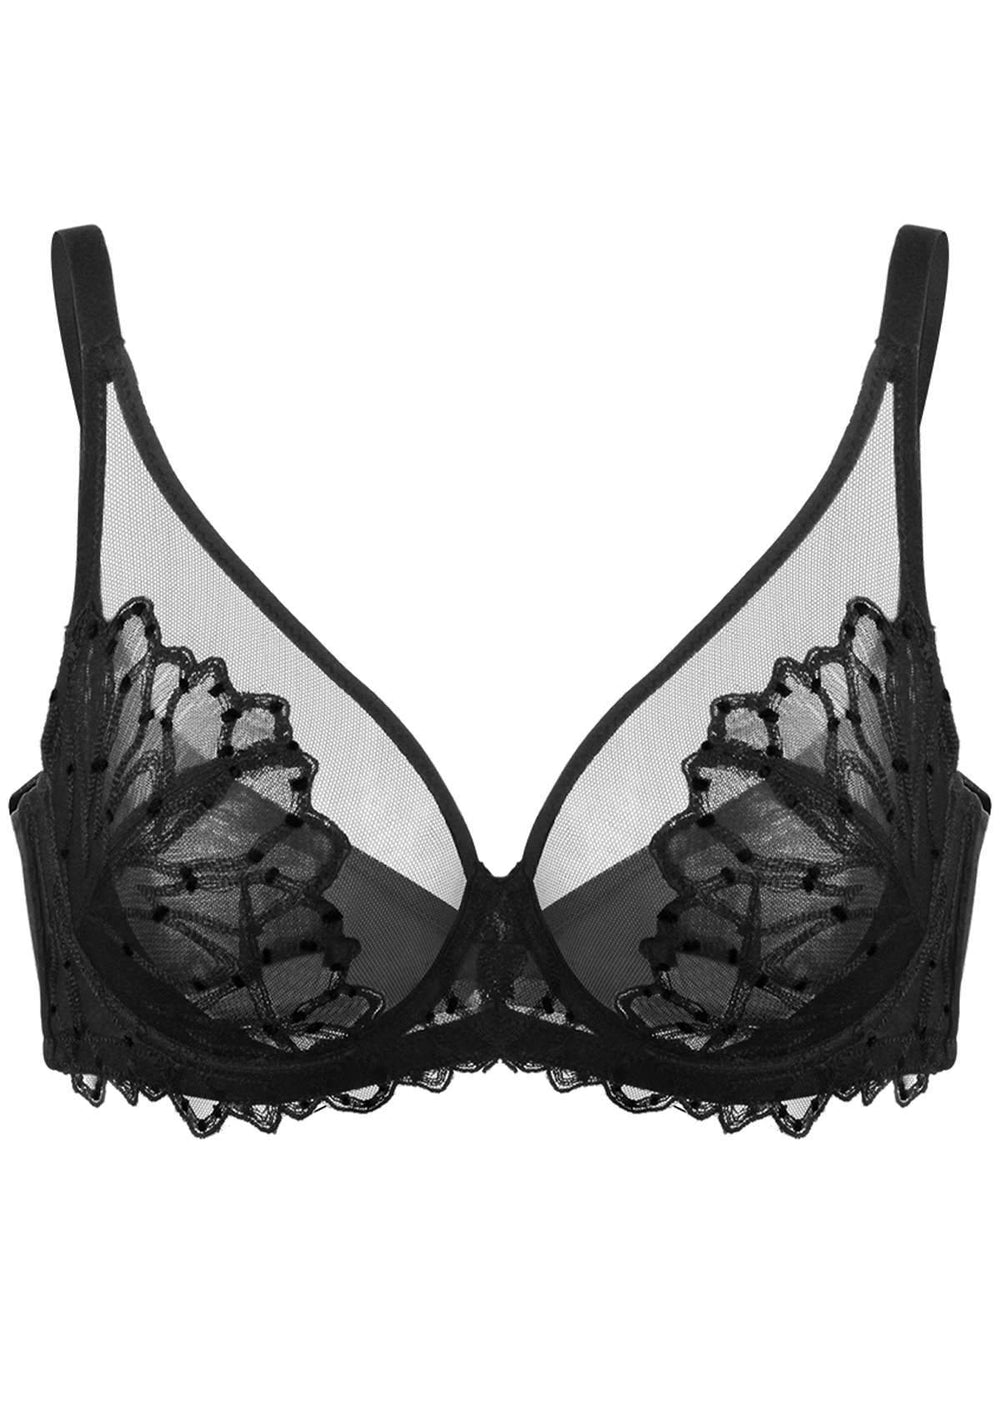 Lace Unlined Full Coverage Bra11300